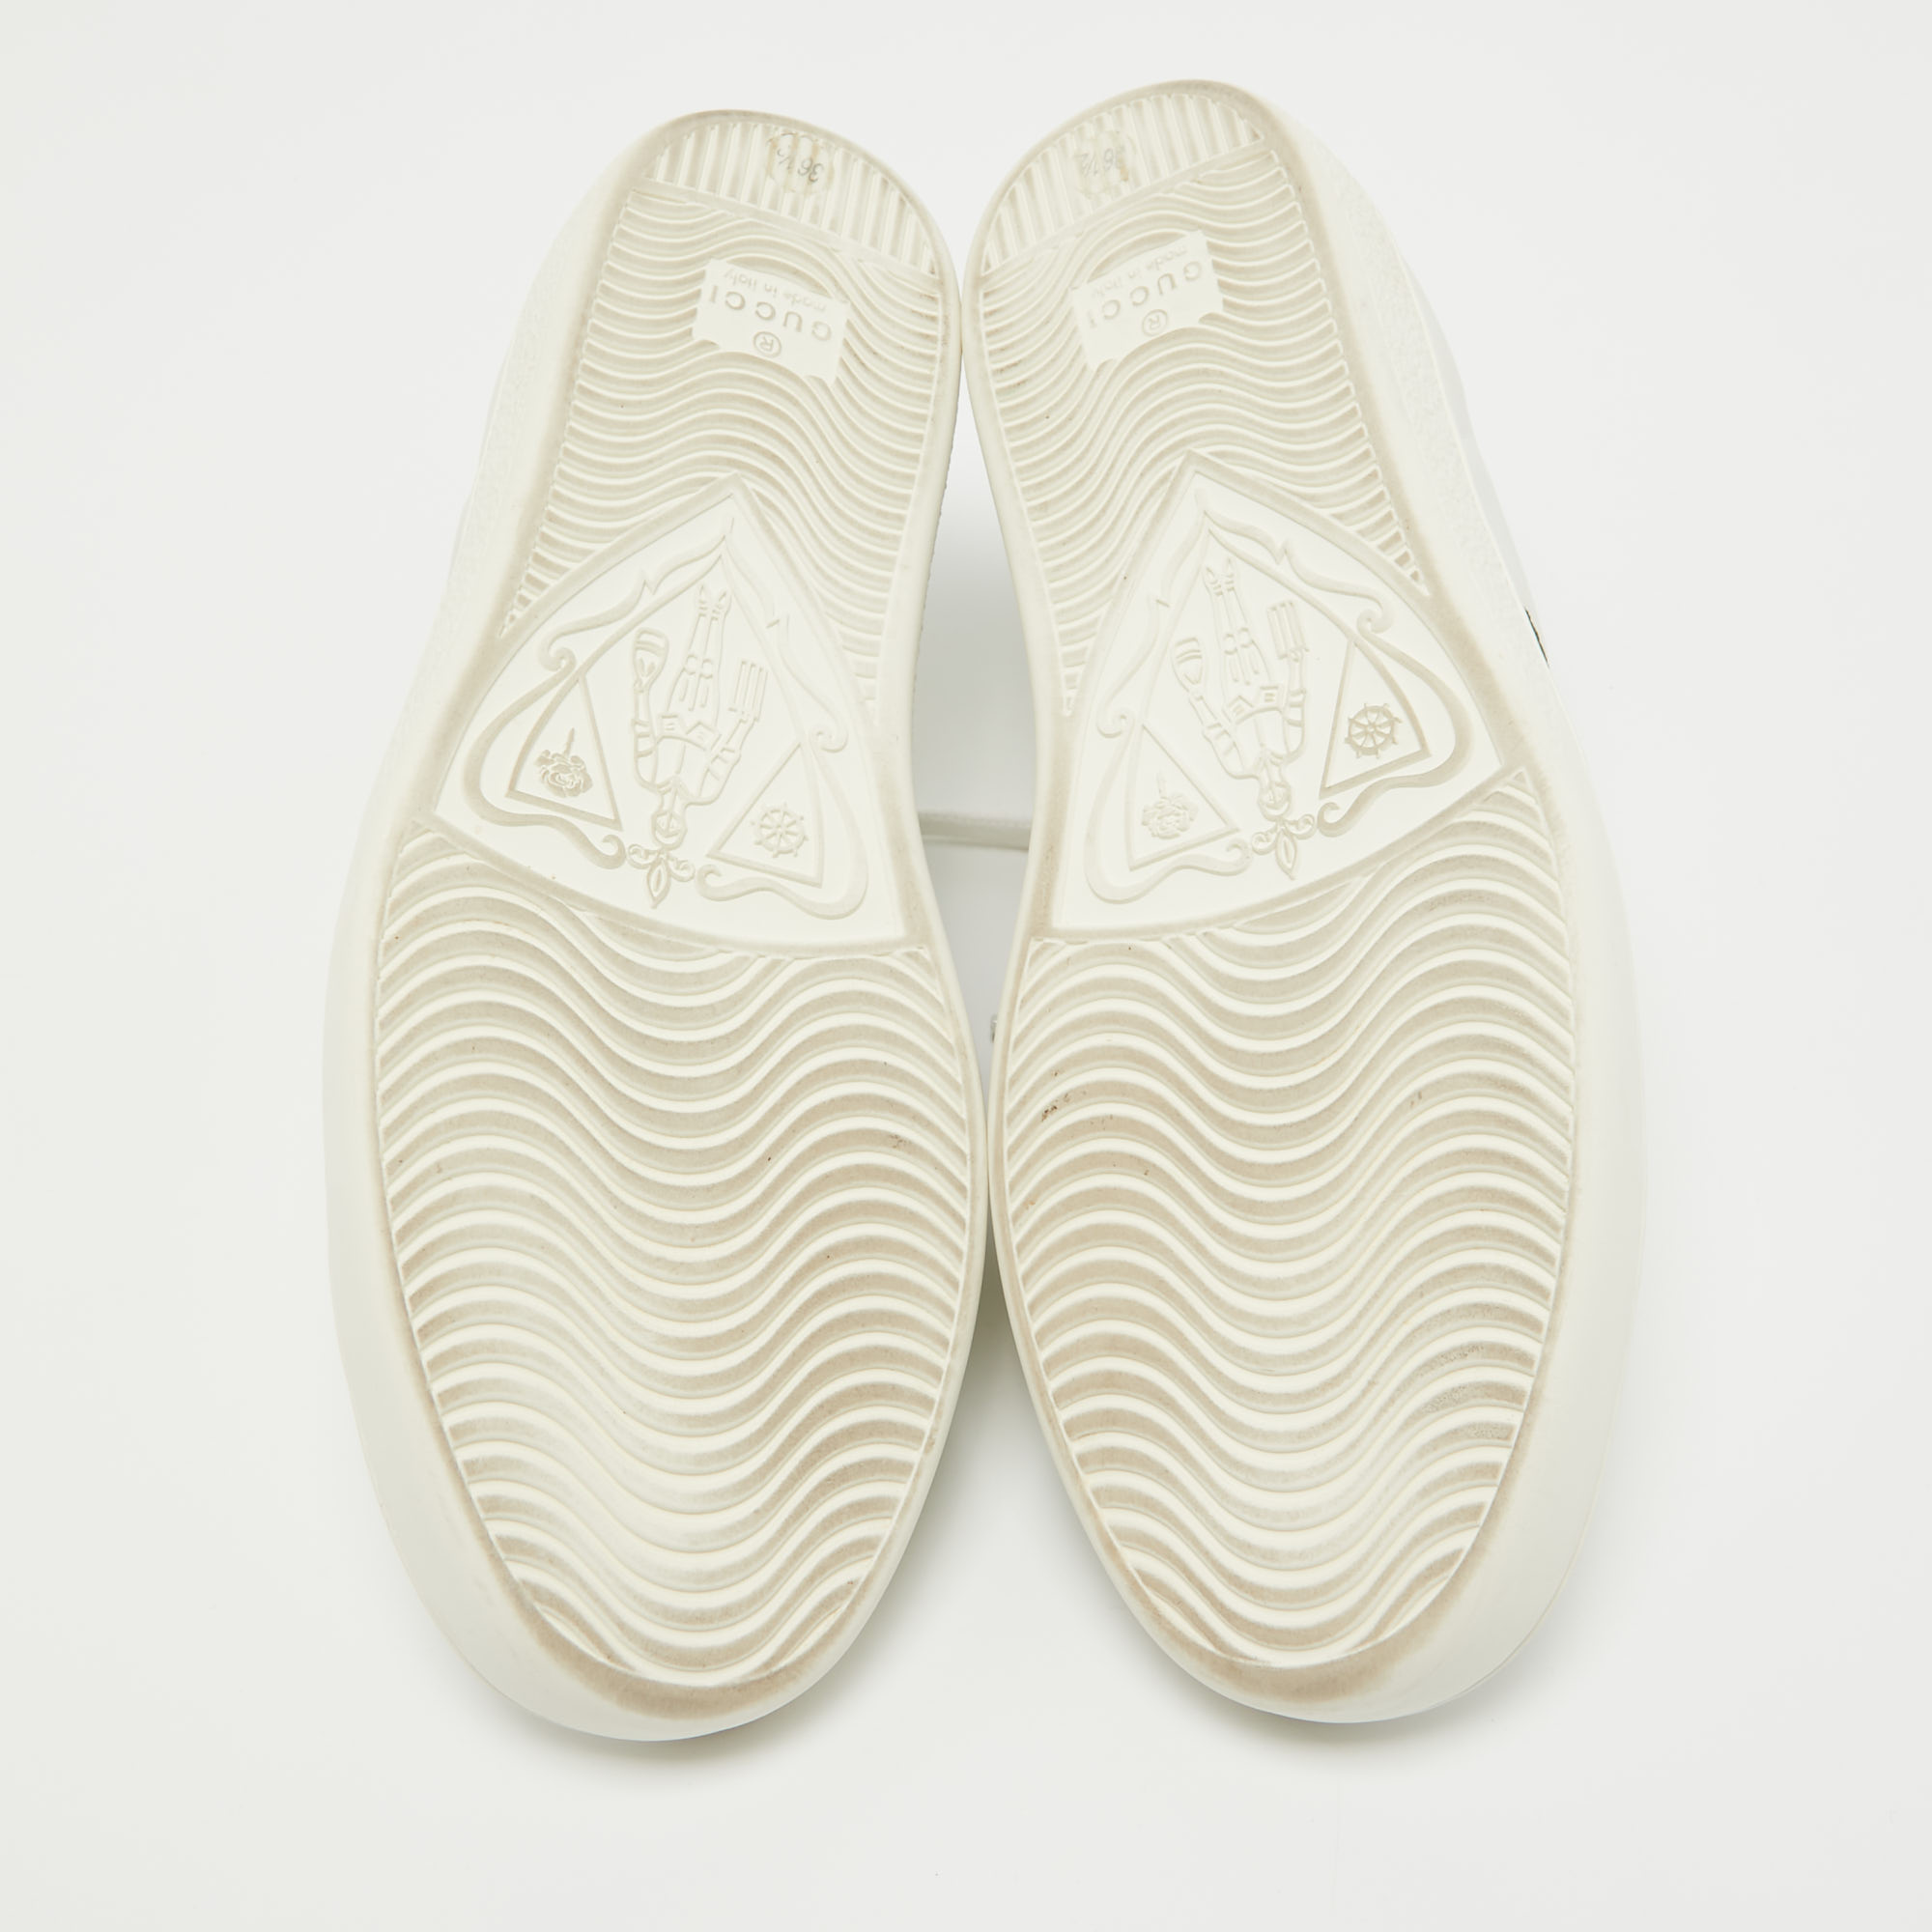 Gucci White Leather Accent Web Low Top Sneakers Size 36.5